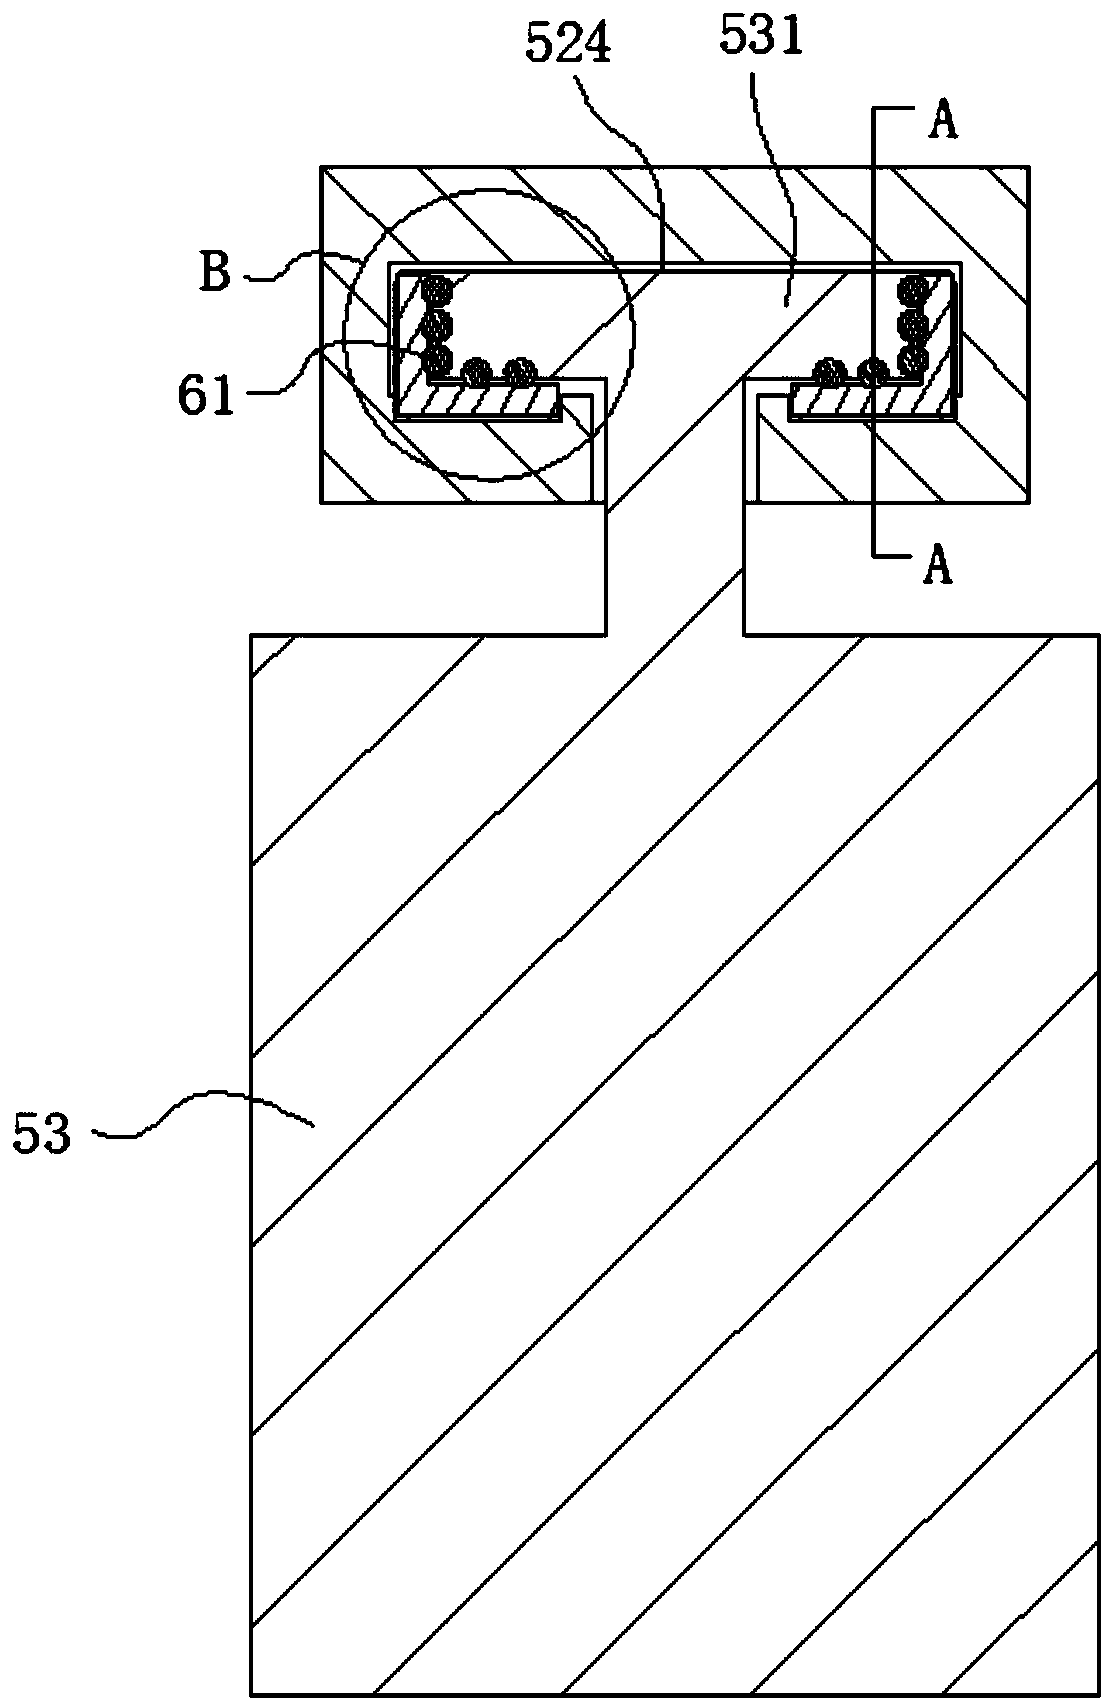 A system for fabric printing and dyeing